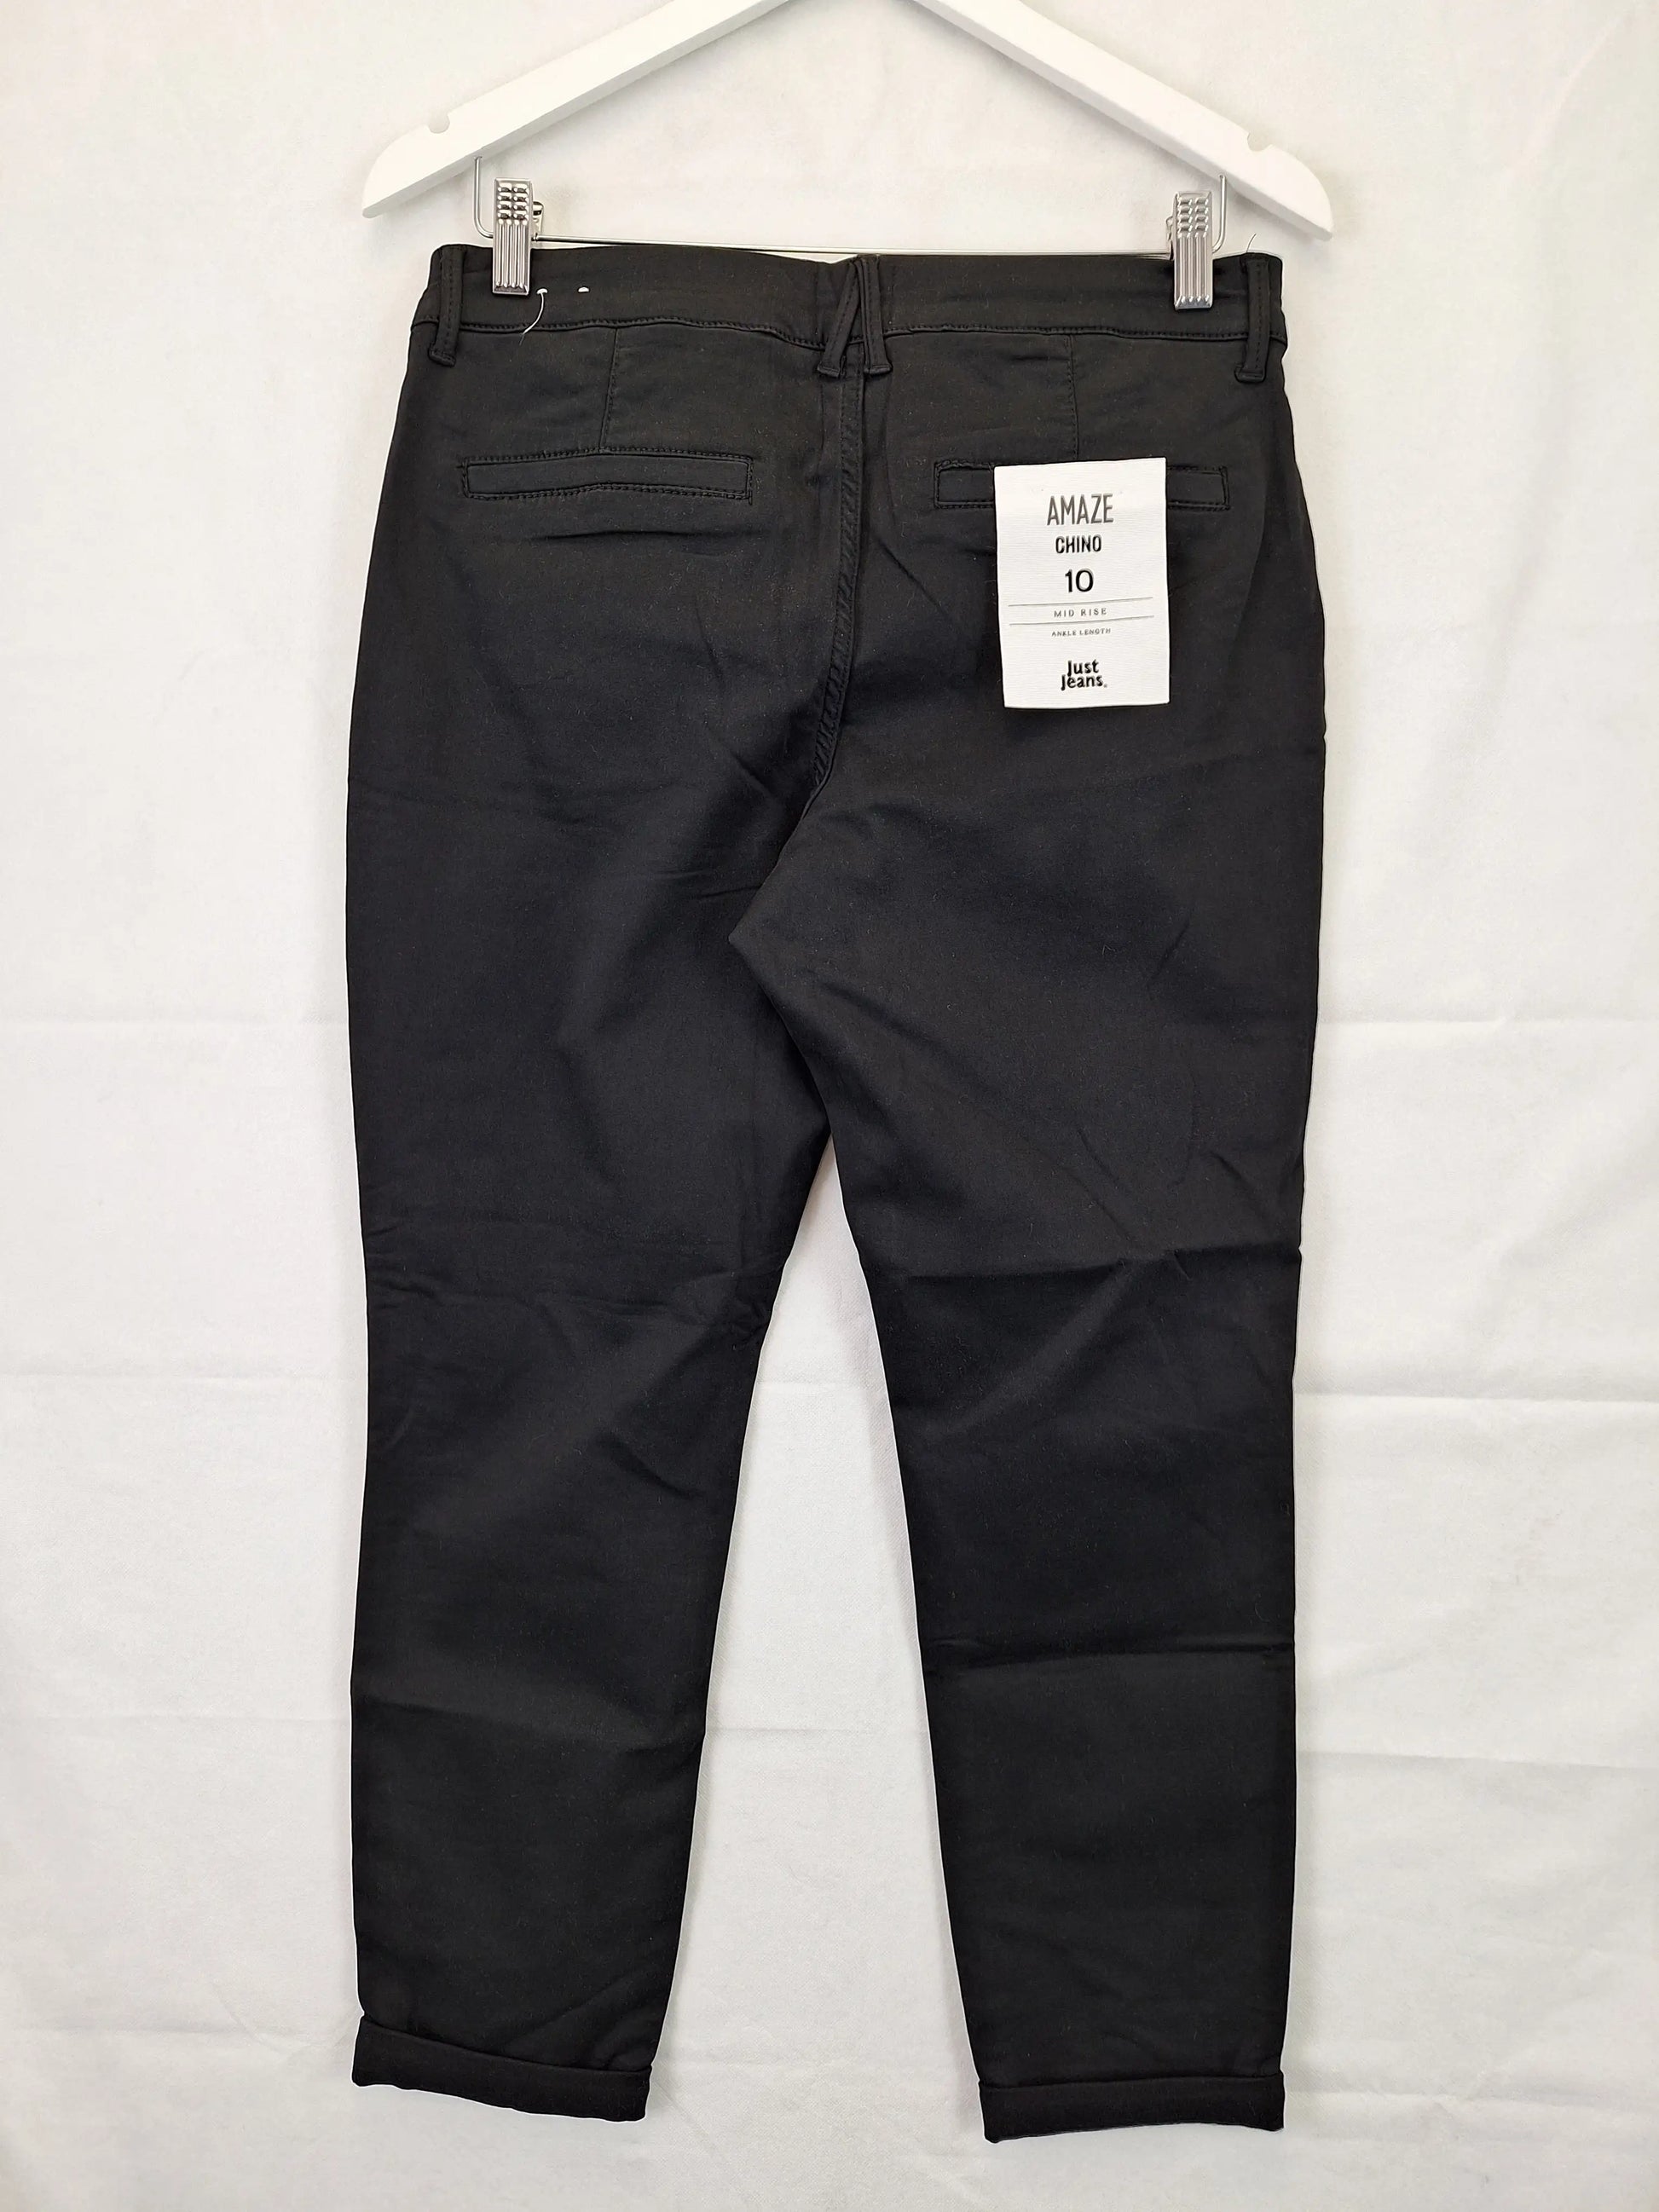 Just Jeans Chino Mid Rise Ankle Length Denim Jeans Size 10 – SwapUp